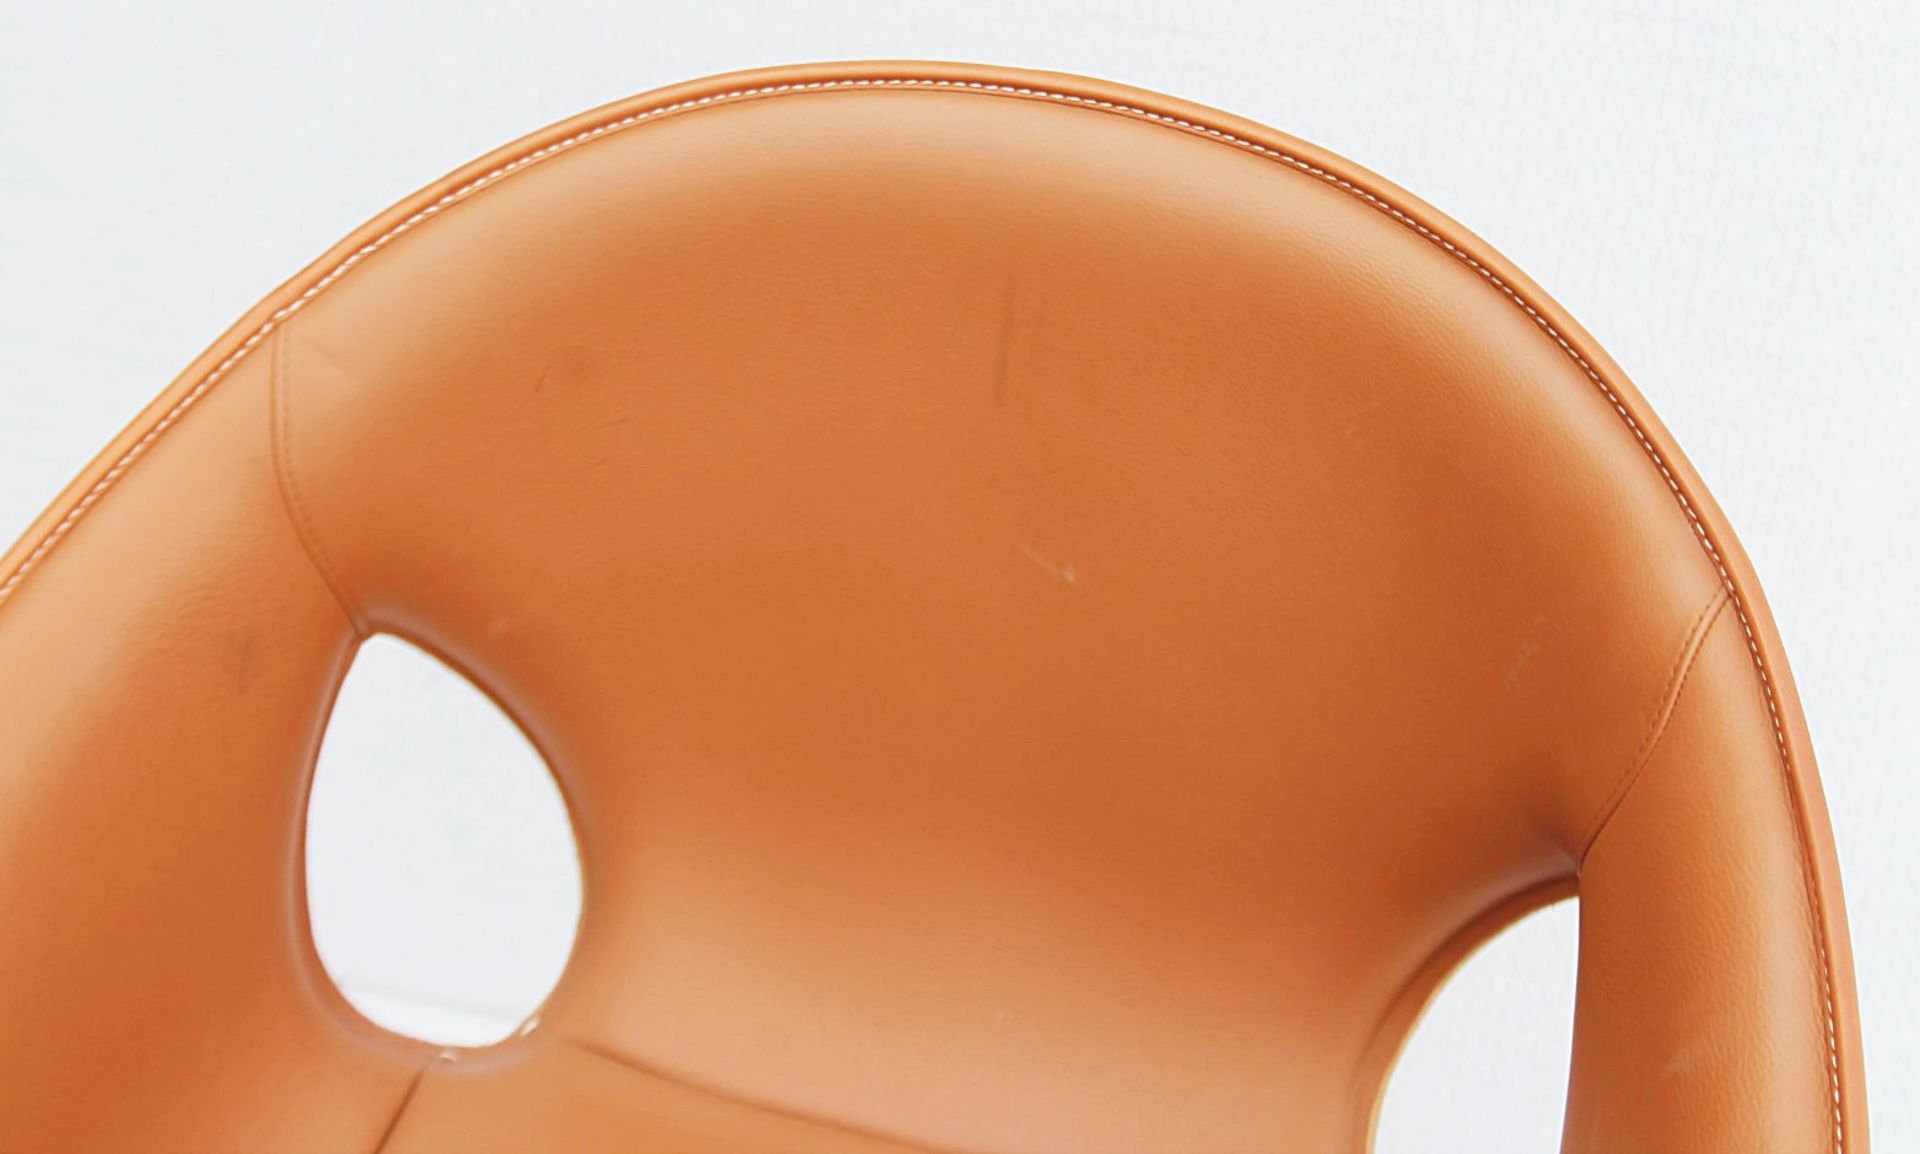 1 x POLTRONA FRAU 'Ginger' Designer Leather Swivel Chair In Bespoke Colours - Original Price £3,299 - Image 3 of 9